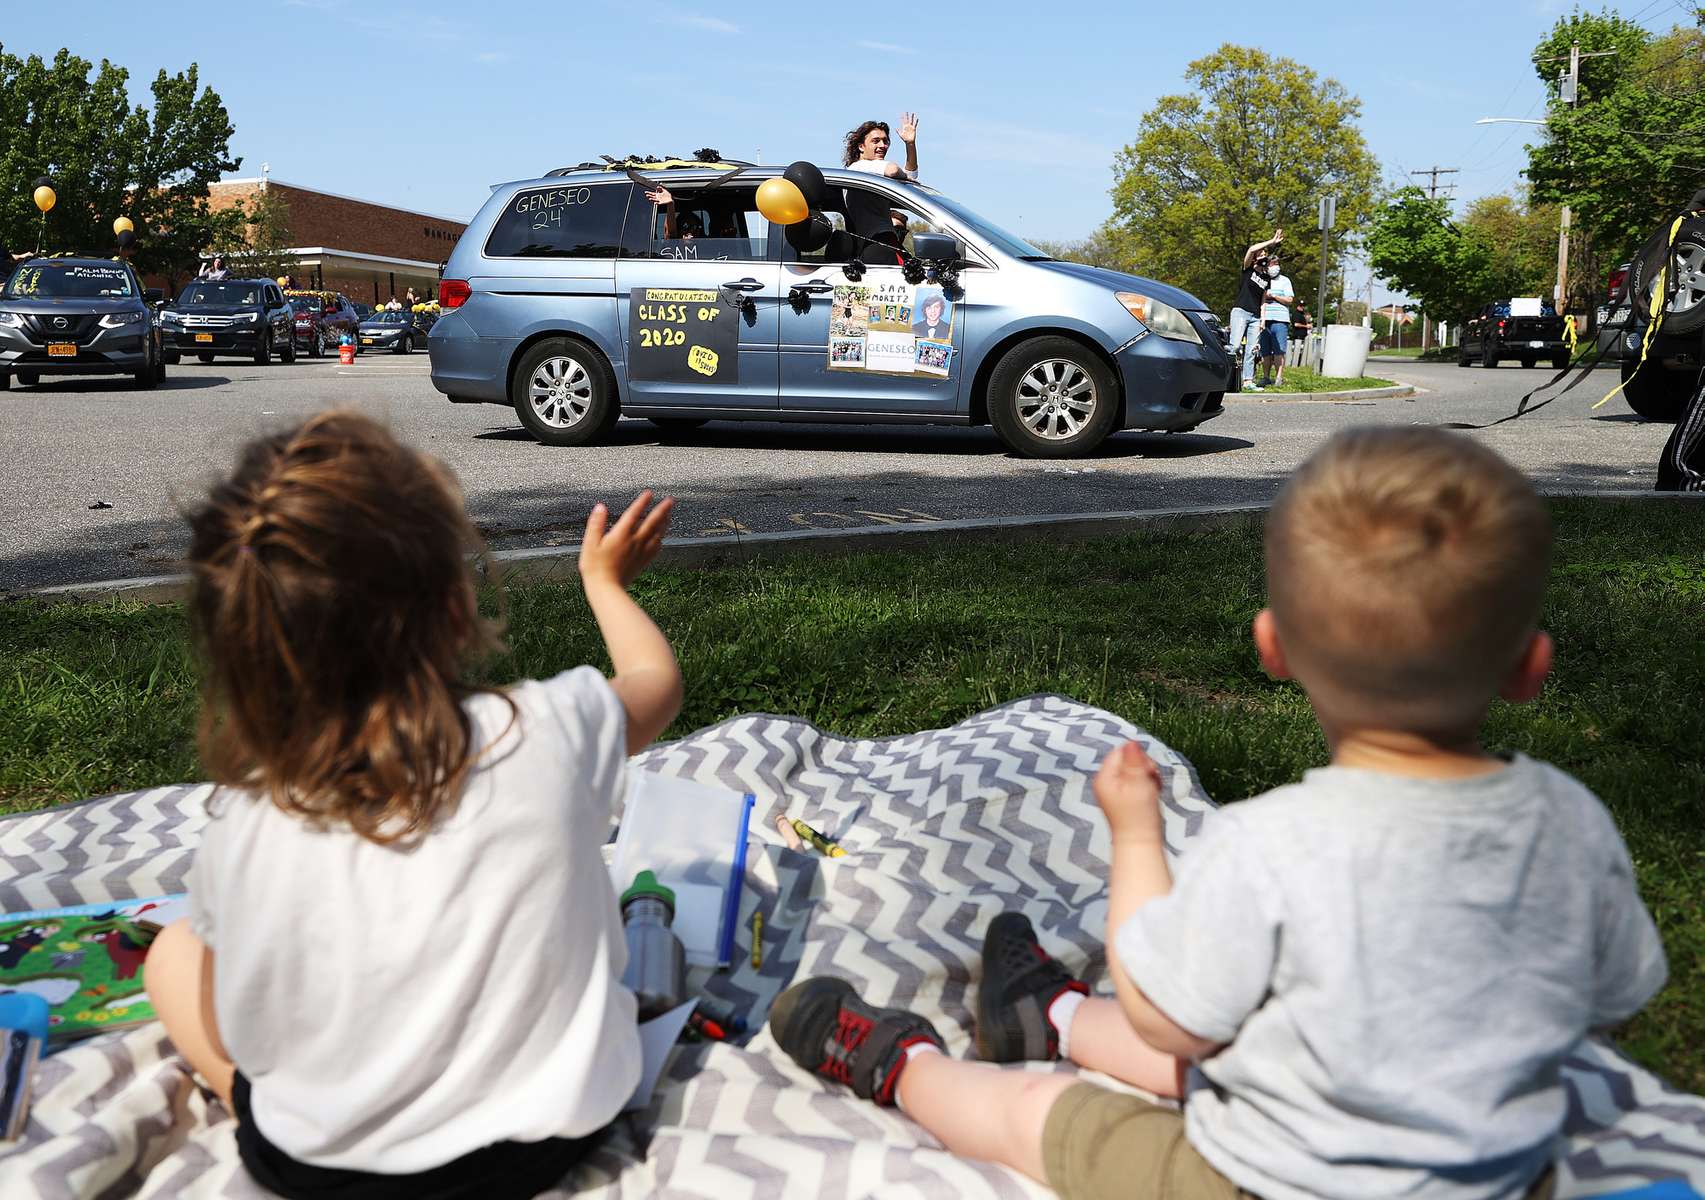 Children wave as graduating Seniors from Wantagh High School drive by the front of the school as their teachers cheer for them on May 15, 2020 in Wantagh, New York.  The school semester  has been cancelled and students had to finish their year with online video classes due to the coronavirus COVID-19 pandemic.  